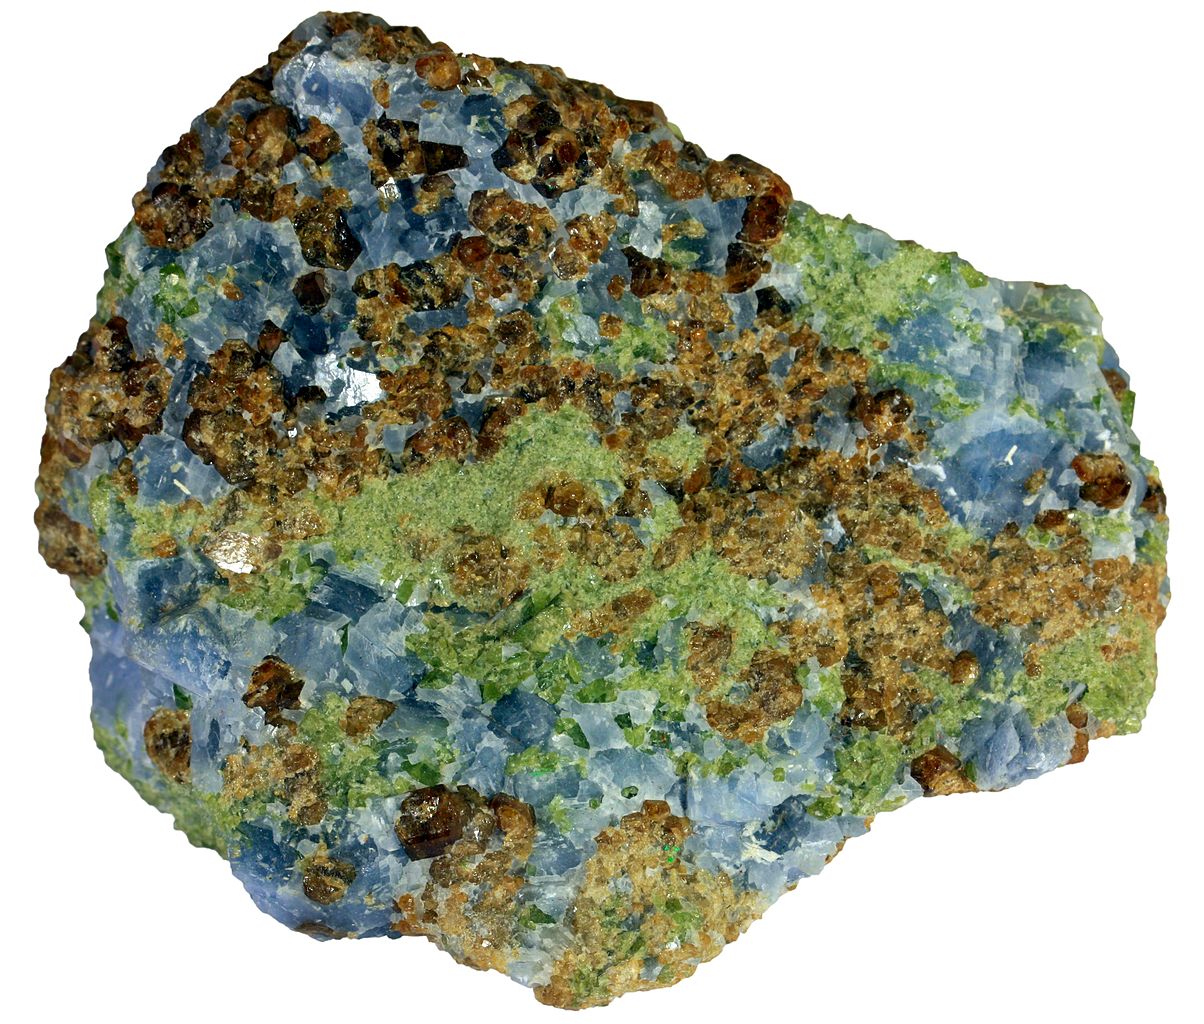 Figure 7.27 A skarn rock from Mount Monzoni, Northern Italy, with recrystallized calcite (blue) garnet (brown) and pyroxene (green). The rock is 6 cm across. [by Siim Sepp, from http://commons.wikimedia.org/wiki/File:00031_6_cm_grossular_calcite_augite_skarn.jpg]